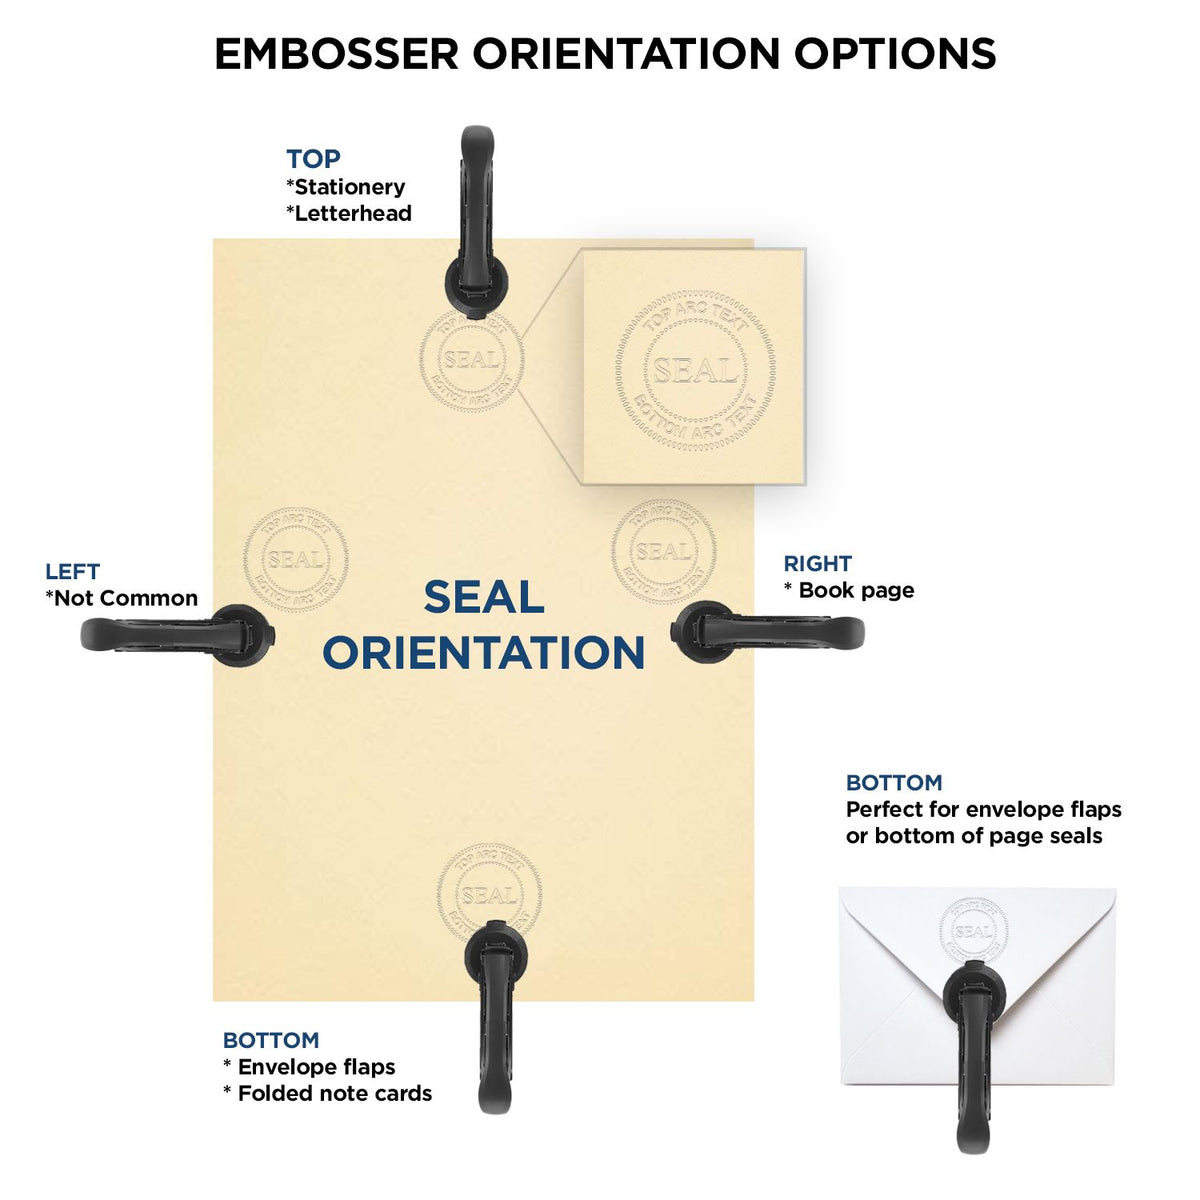 An infographic for the Louisiana Desk Surveyor Seal Embosser showing embosser orientation, this is showing examples of a top, bottom, right and left insert.